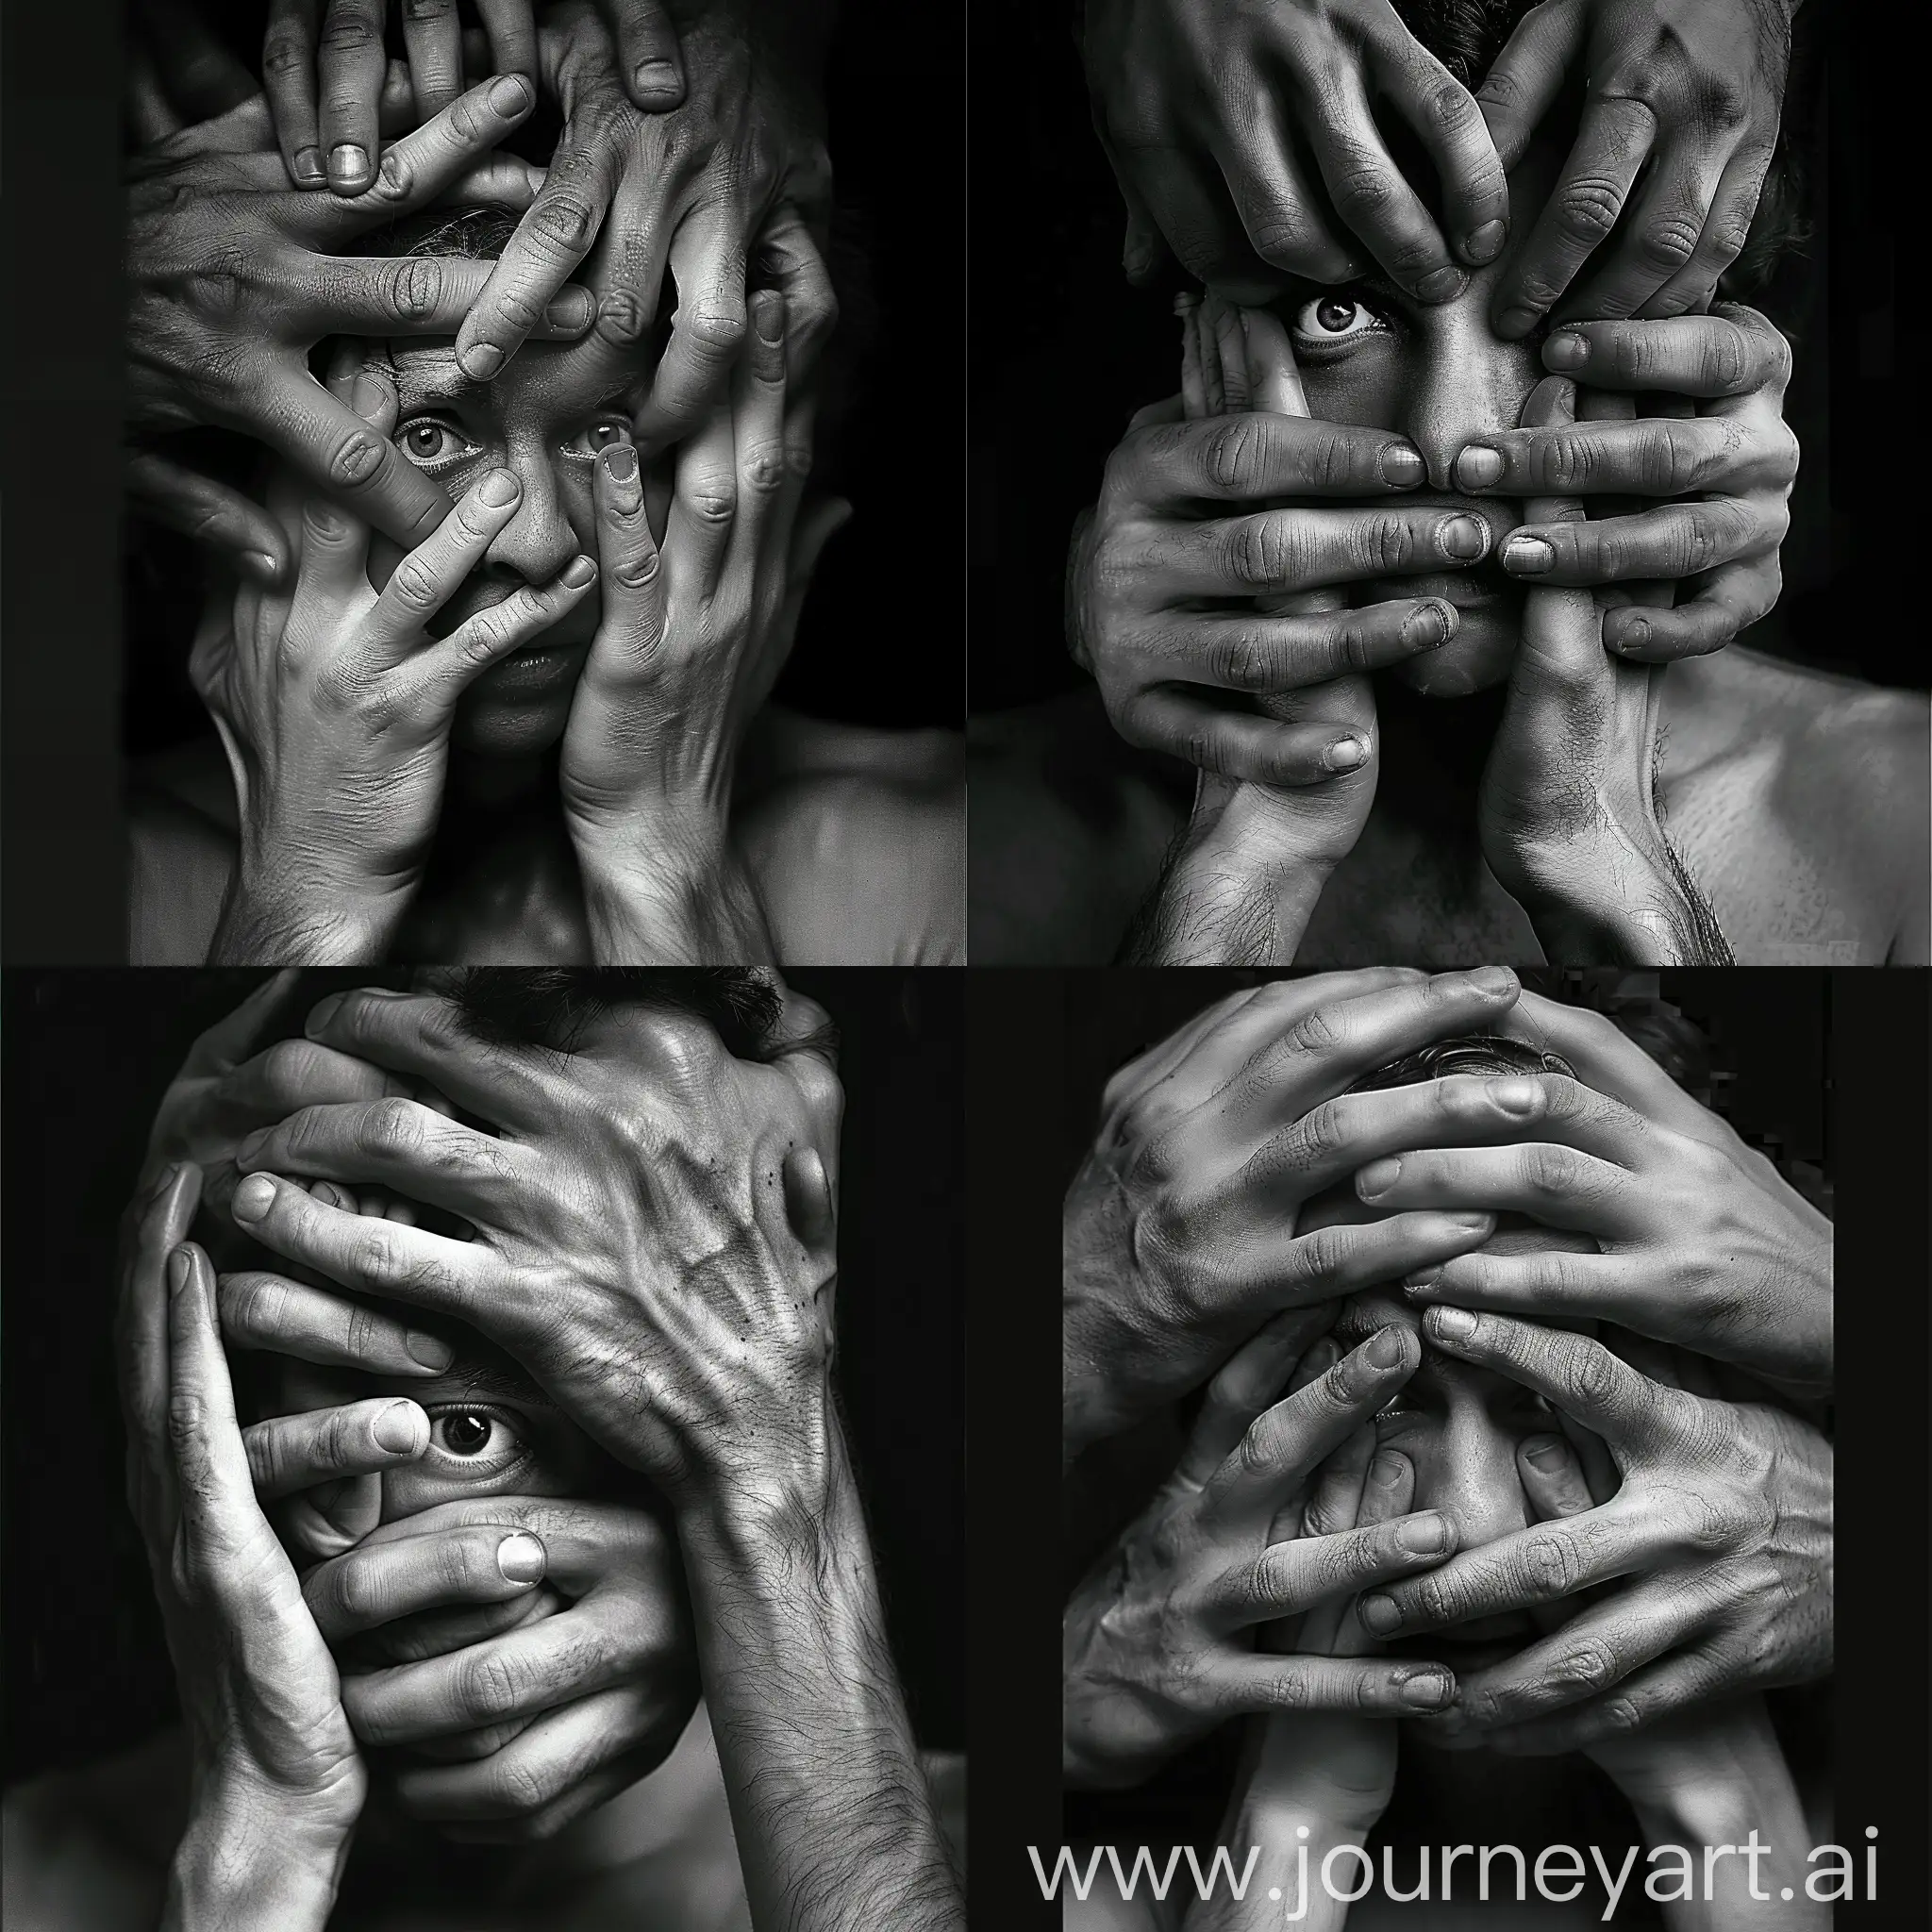 Surreal-Portrait-of-Person-Enveloped-by-Hands